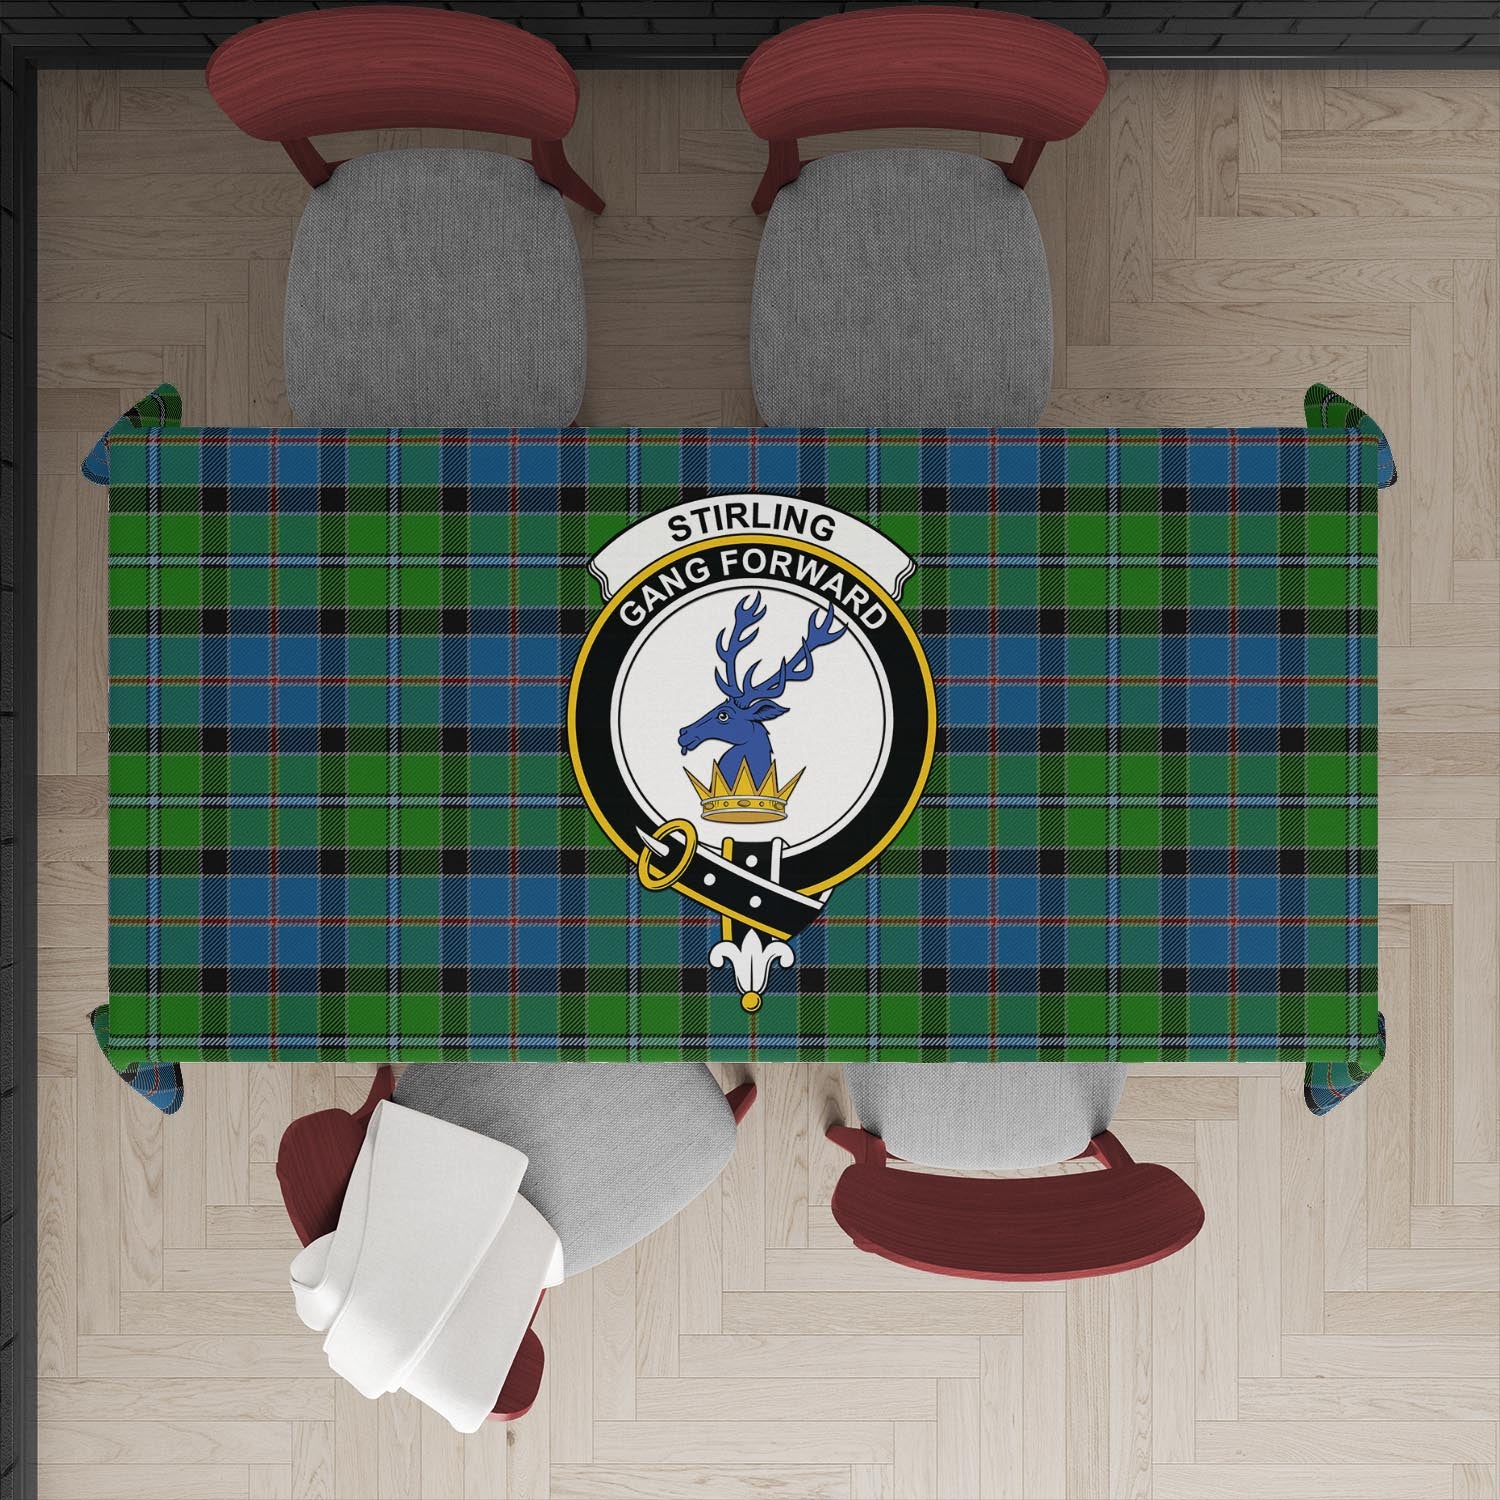 stirling-tatan-tablecloth-with-family-crest